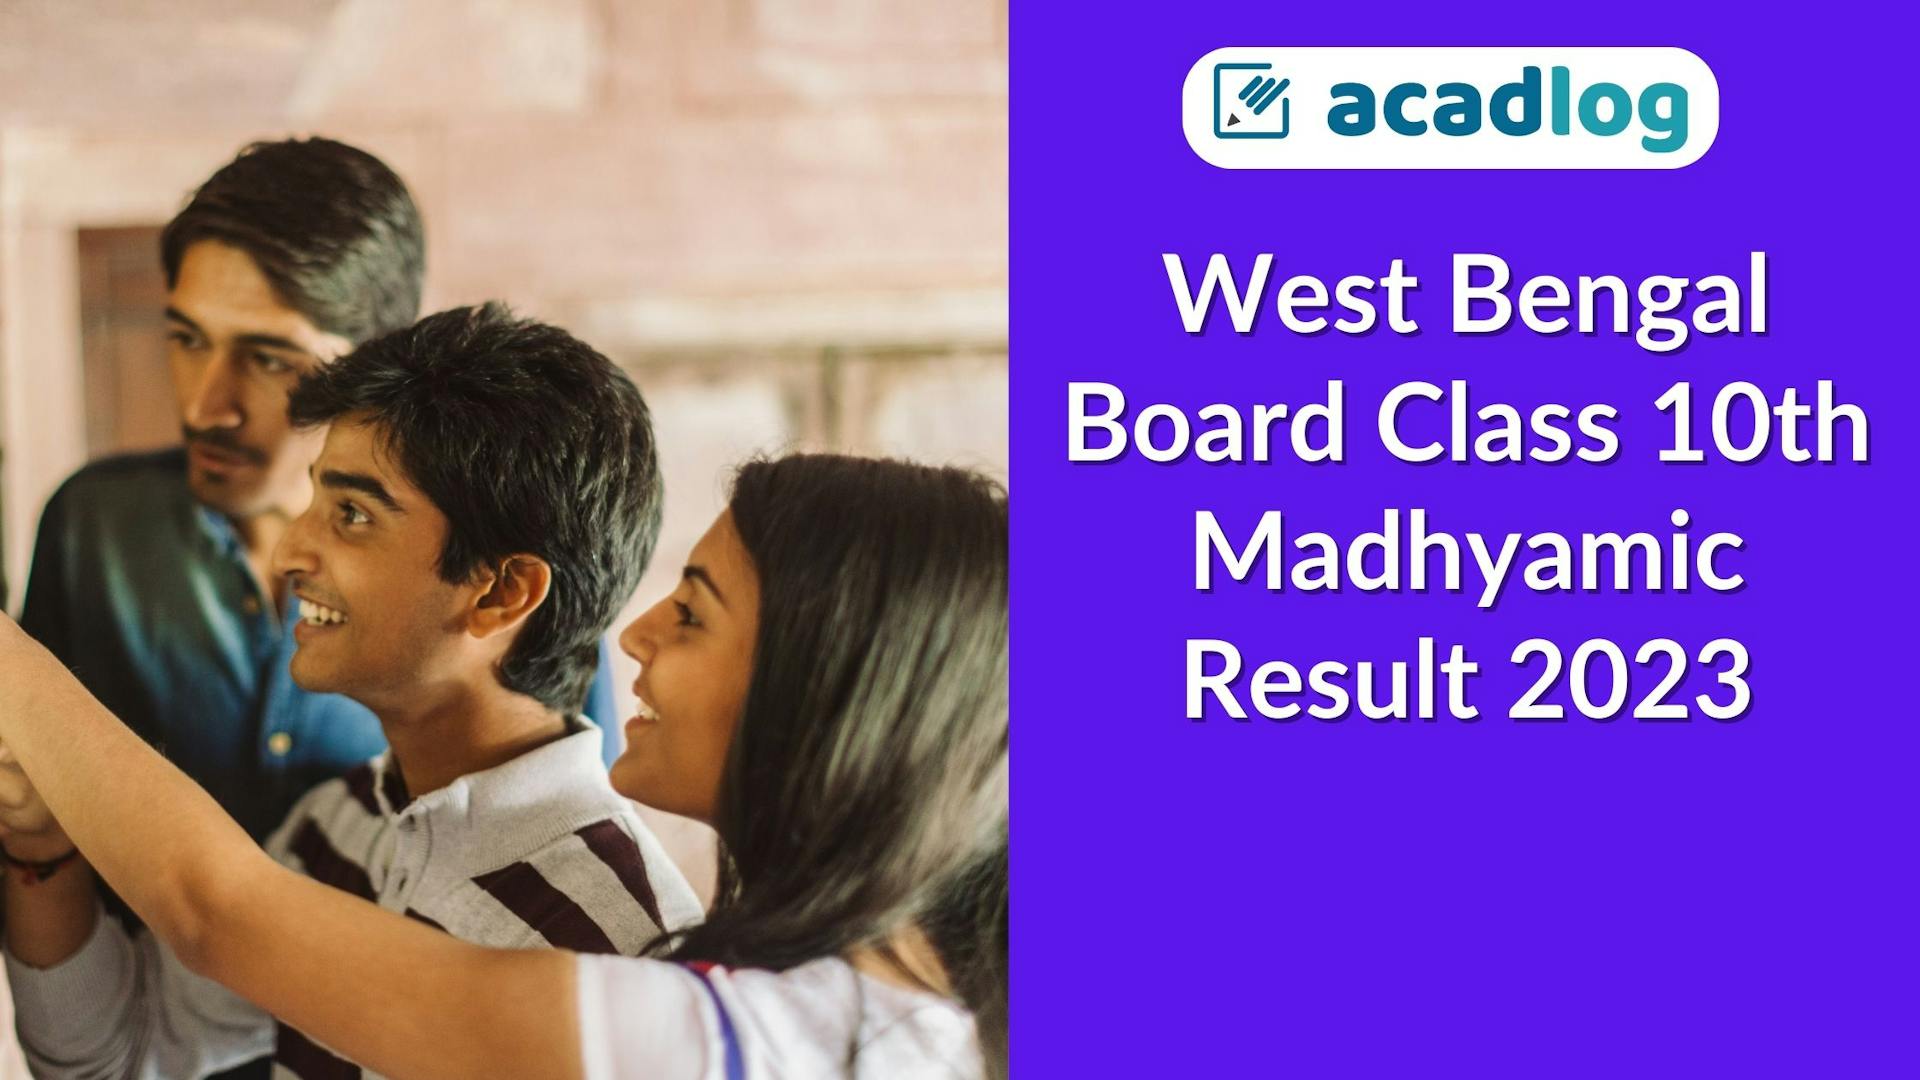 West Bengal Board WBBSE Class 10th Madhyamic Results 2023 Direct Link